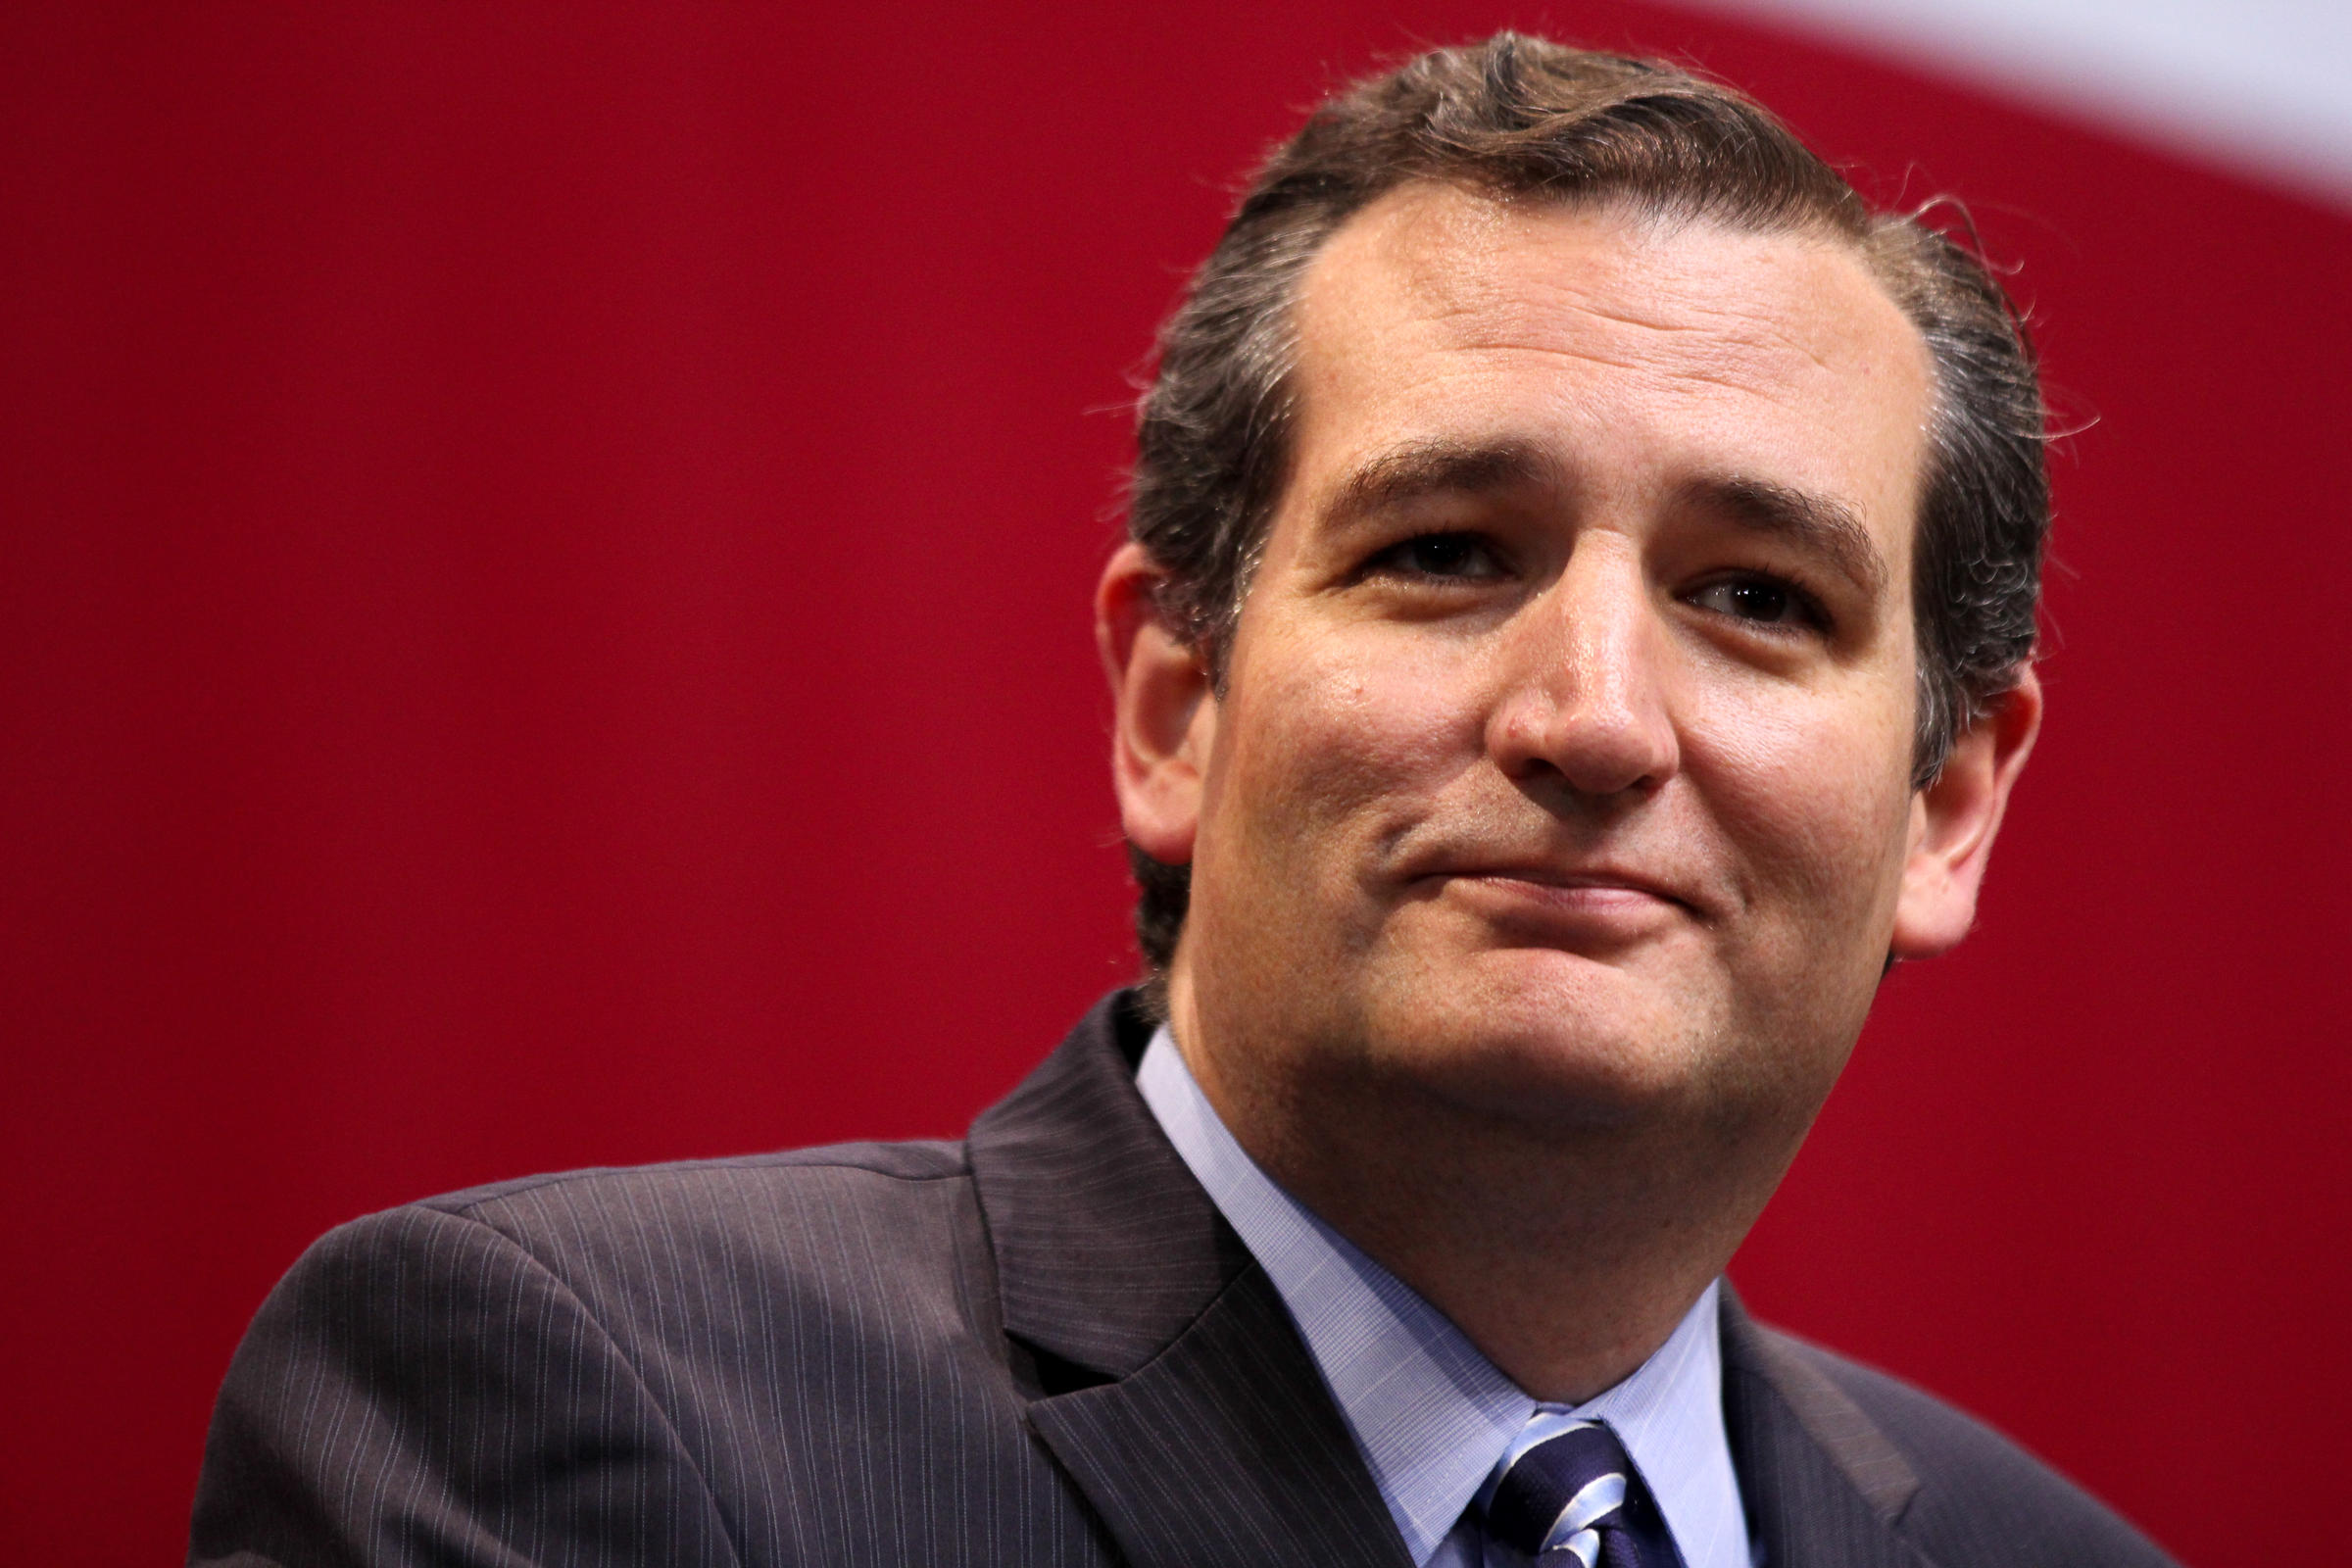 If possible, please join me in welcoming Senator Ted Cruz to Wichita Falls this Wednesday, April 4th, for a campaign event. He will be at The Kitchen (1000 Burnett St.) at 3pm on Wednesday to recognize and honor members of our veterans’ community. It is absolutely free and open to the public. If you’d like to attend […]